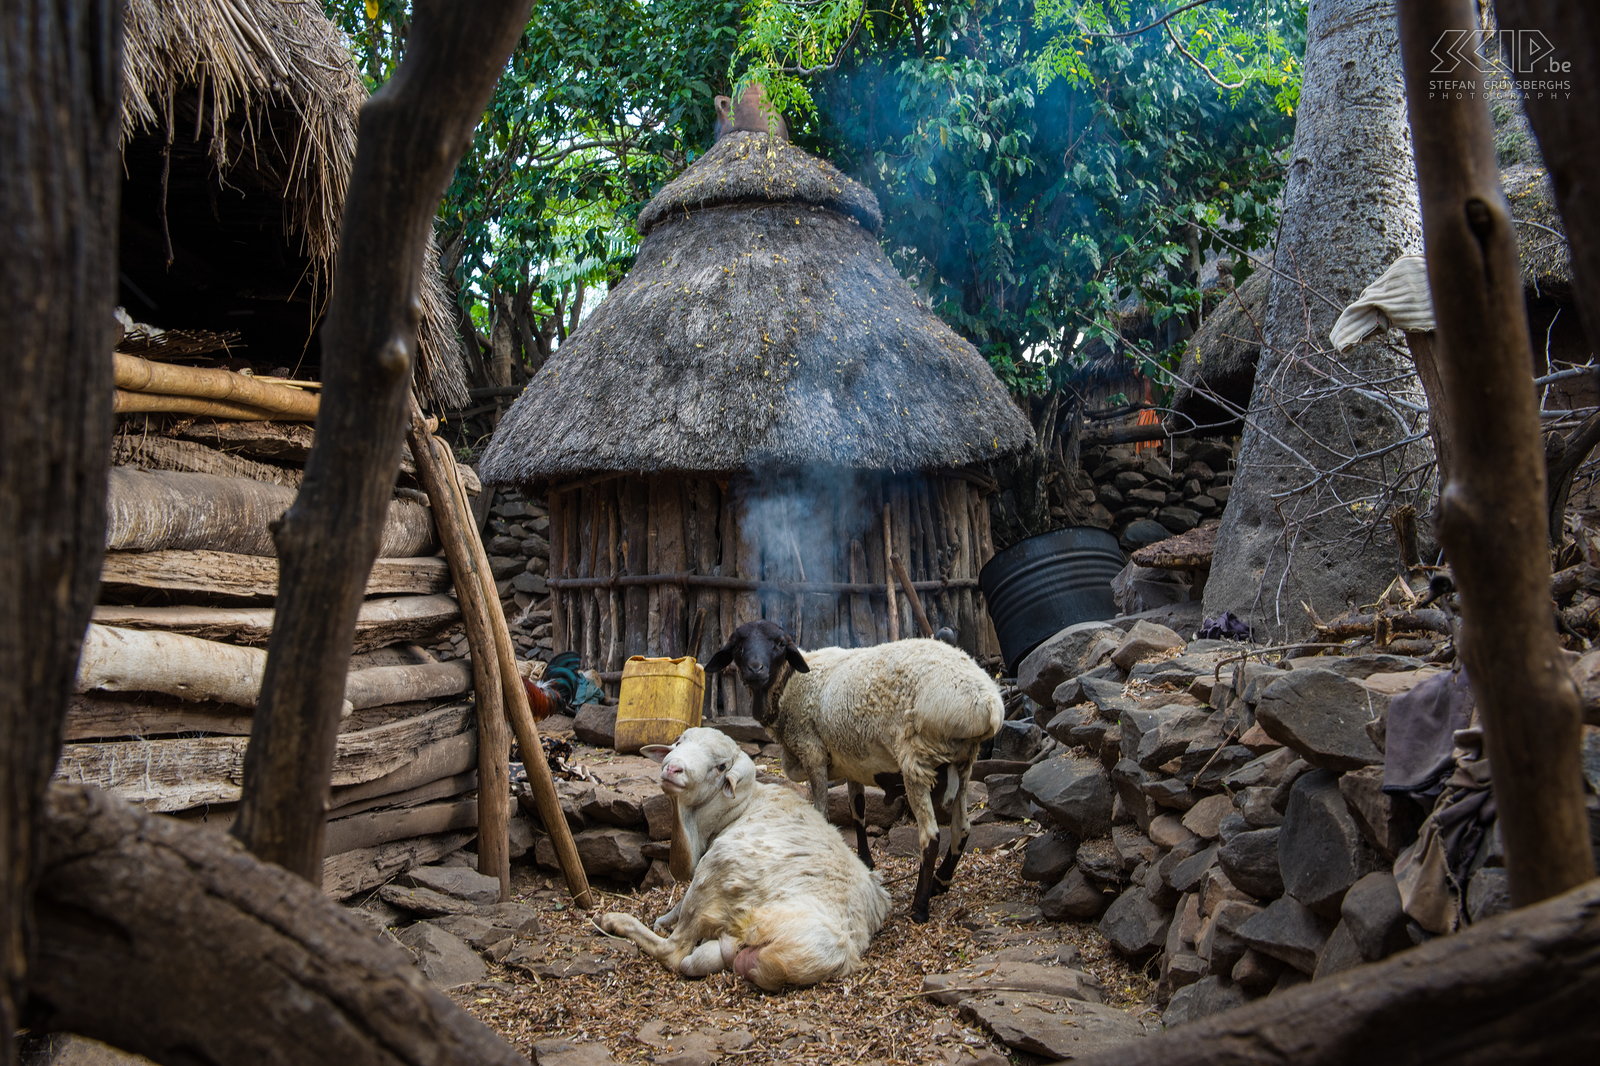 Konso - Hut A Konso village consists of stone-walled enclosures with huts.  Stefan Cruysberghs